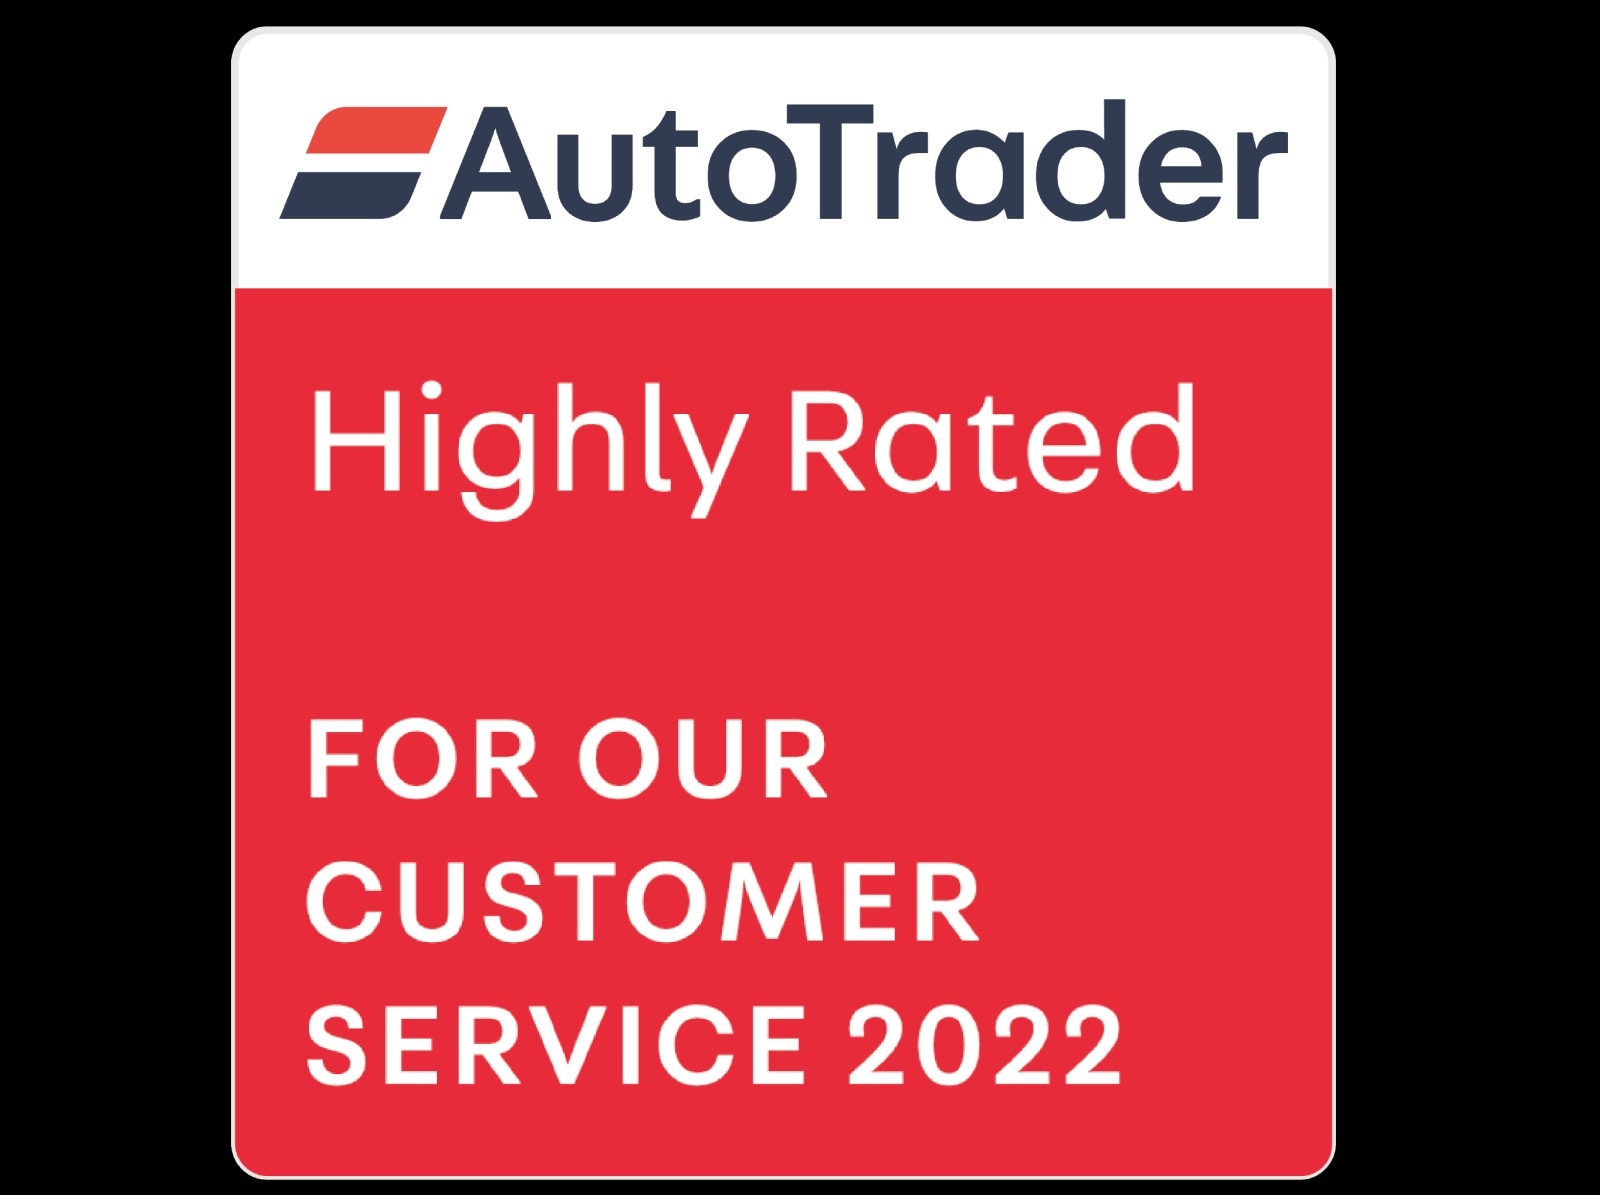 Autotrader Highly Rated Award 2022! For our outstanding customer service!